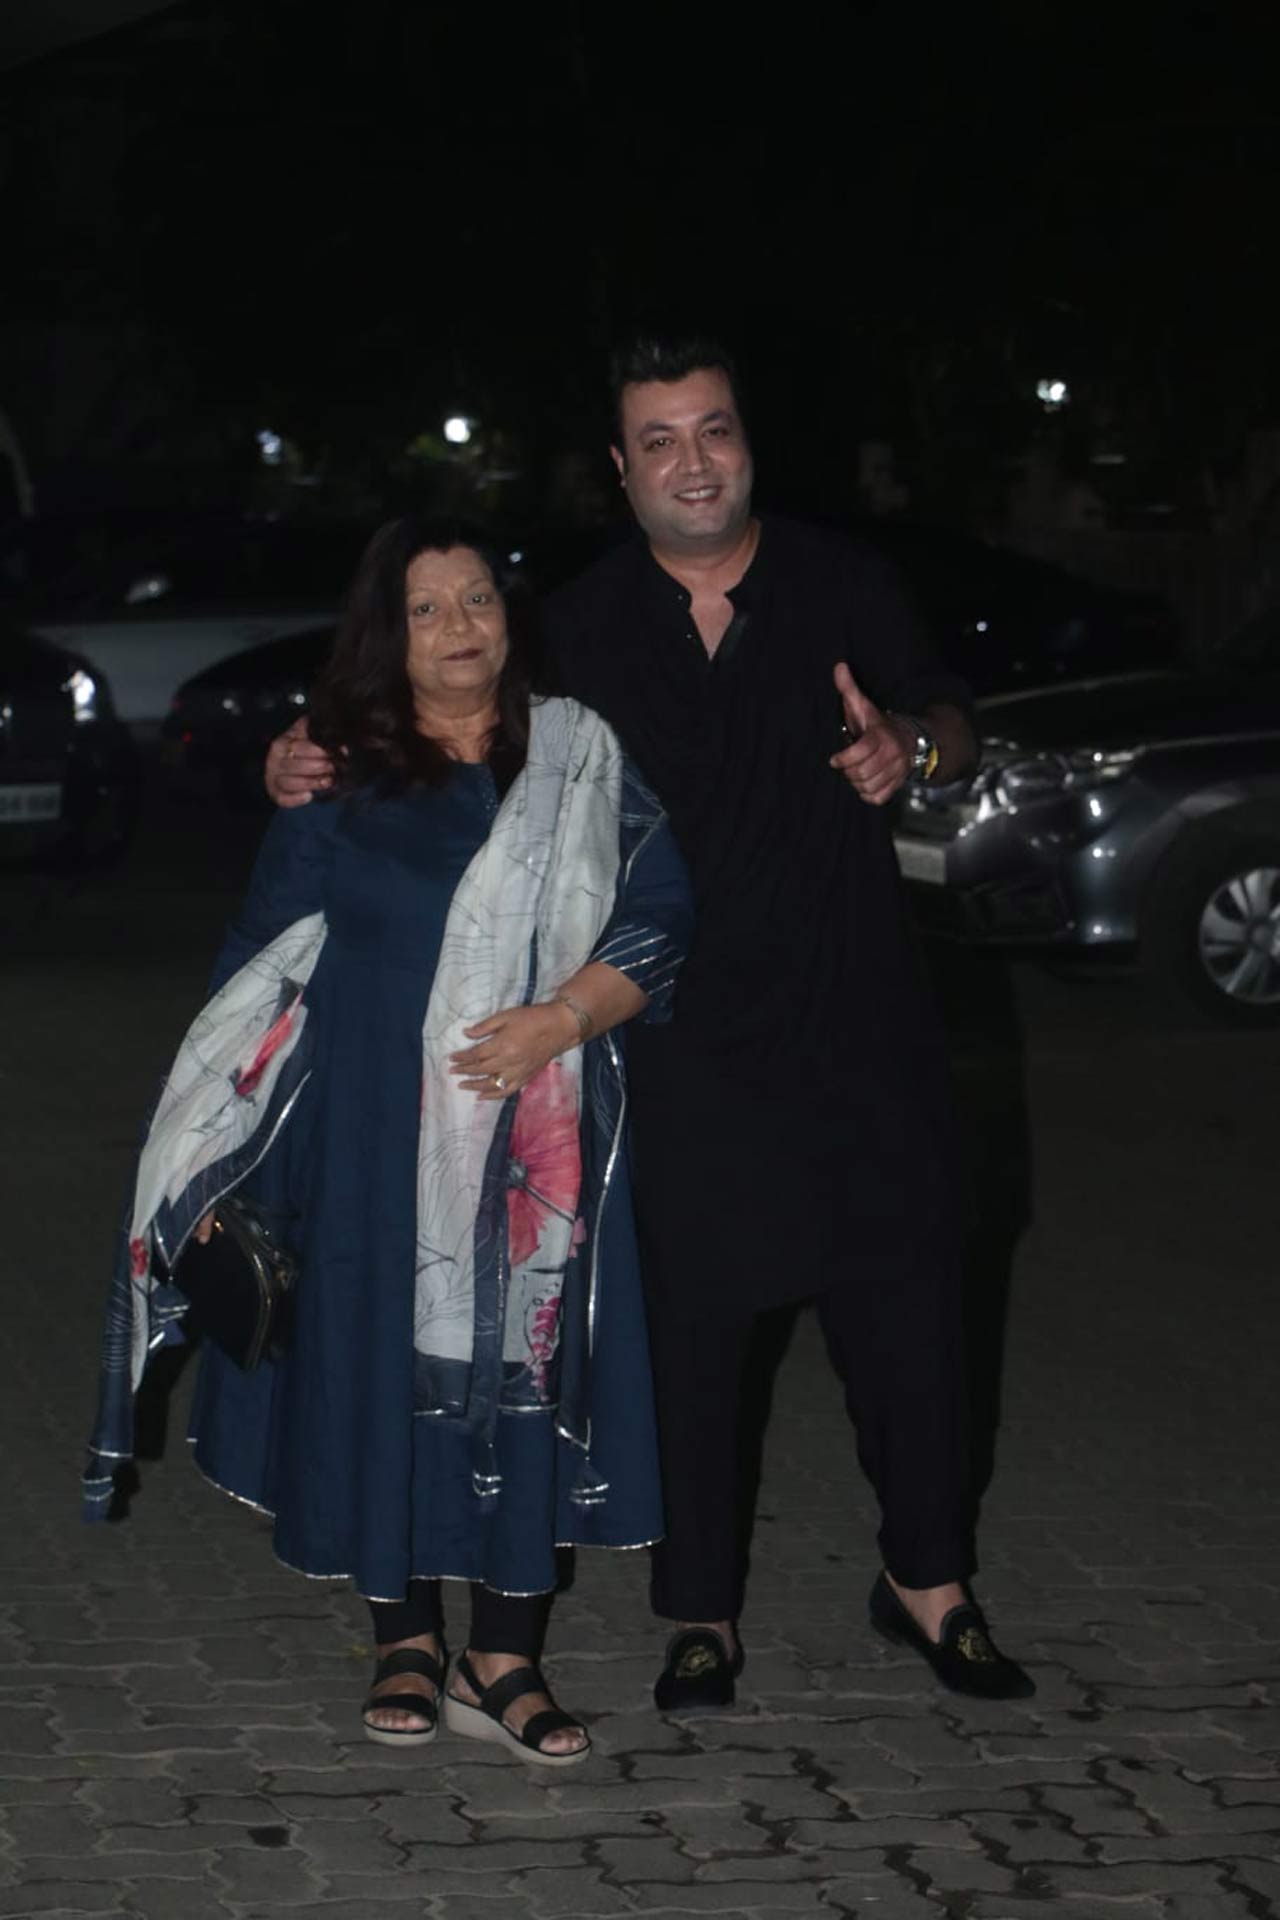 Varun Sharma showed off his funny side when snapped by the paparazzi.